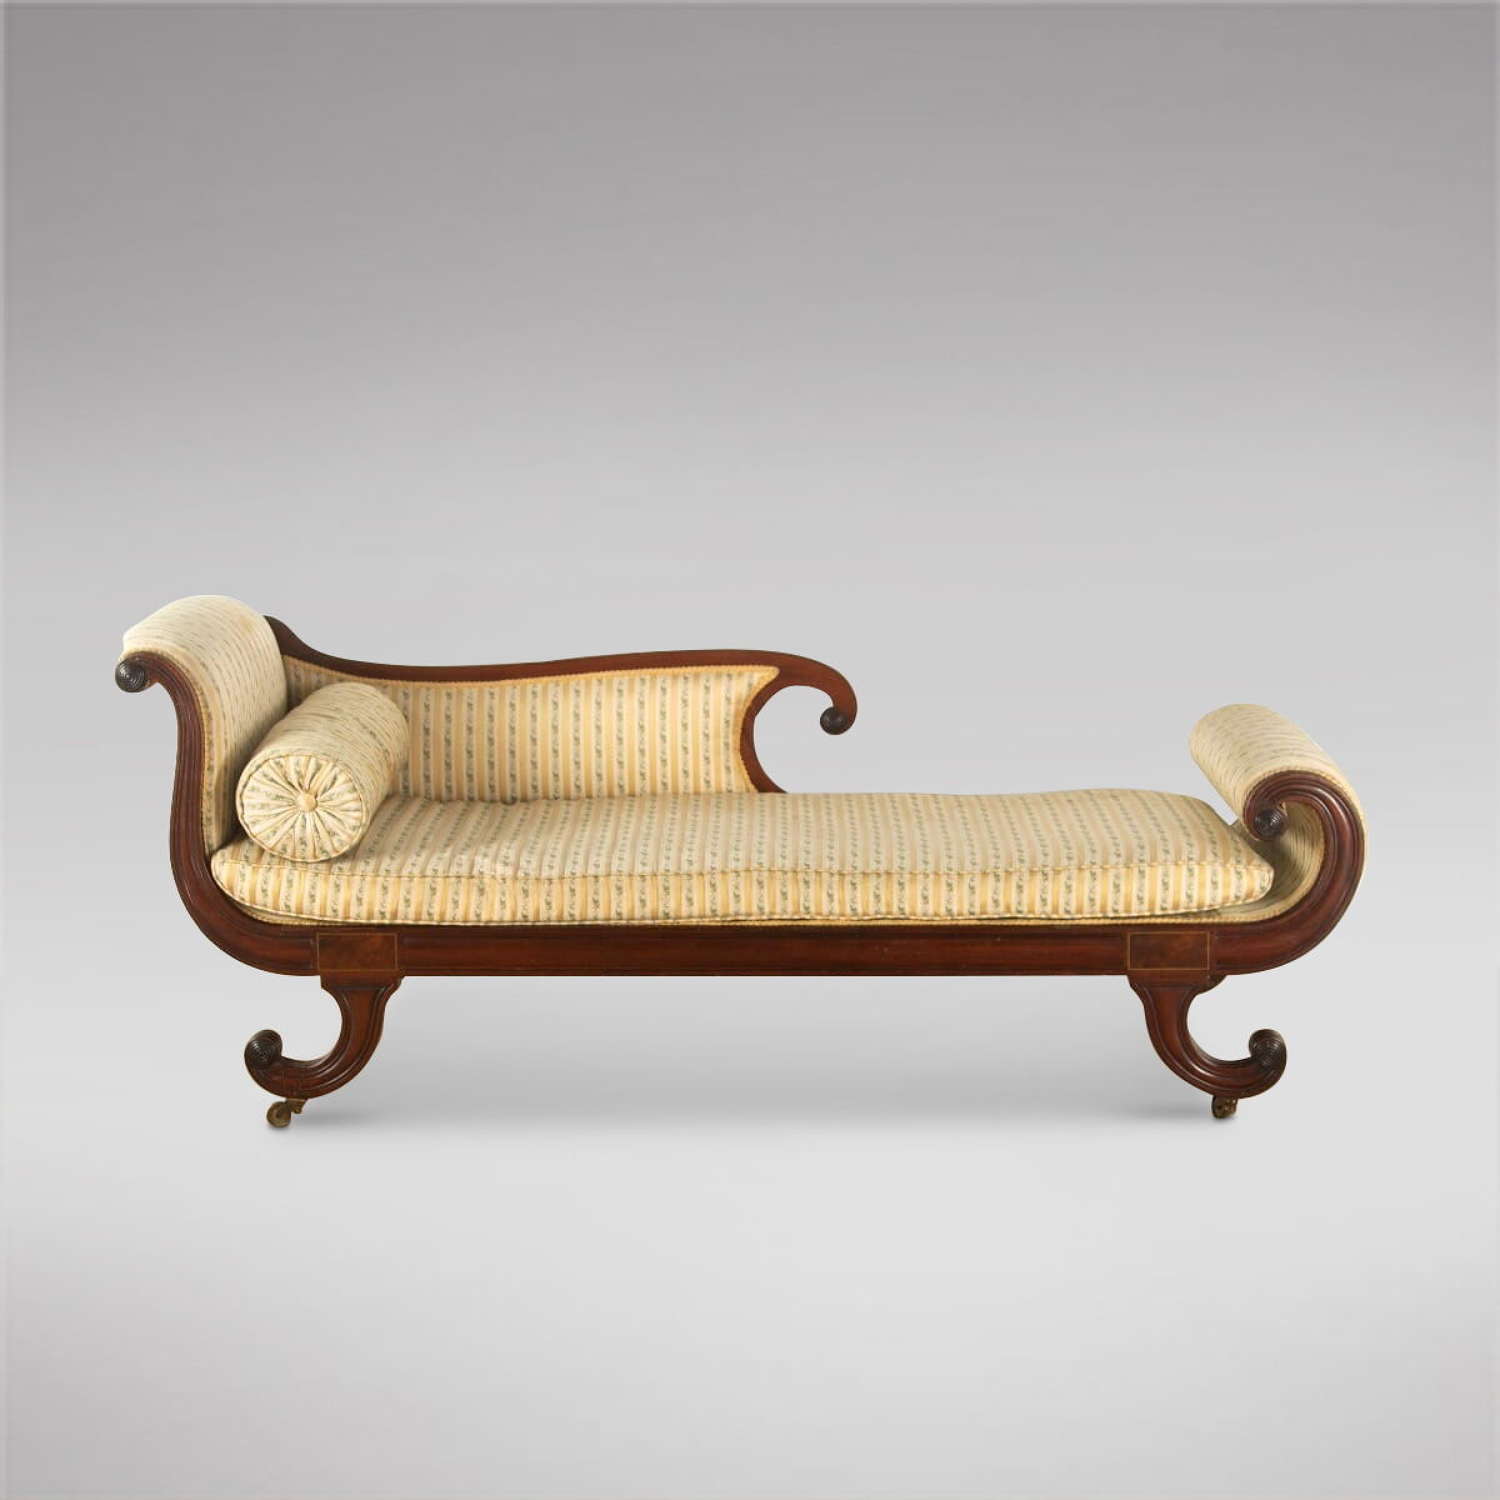 Regency Mahogany Daybed / Chaise Lounge